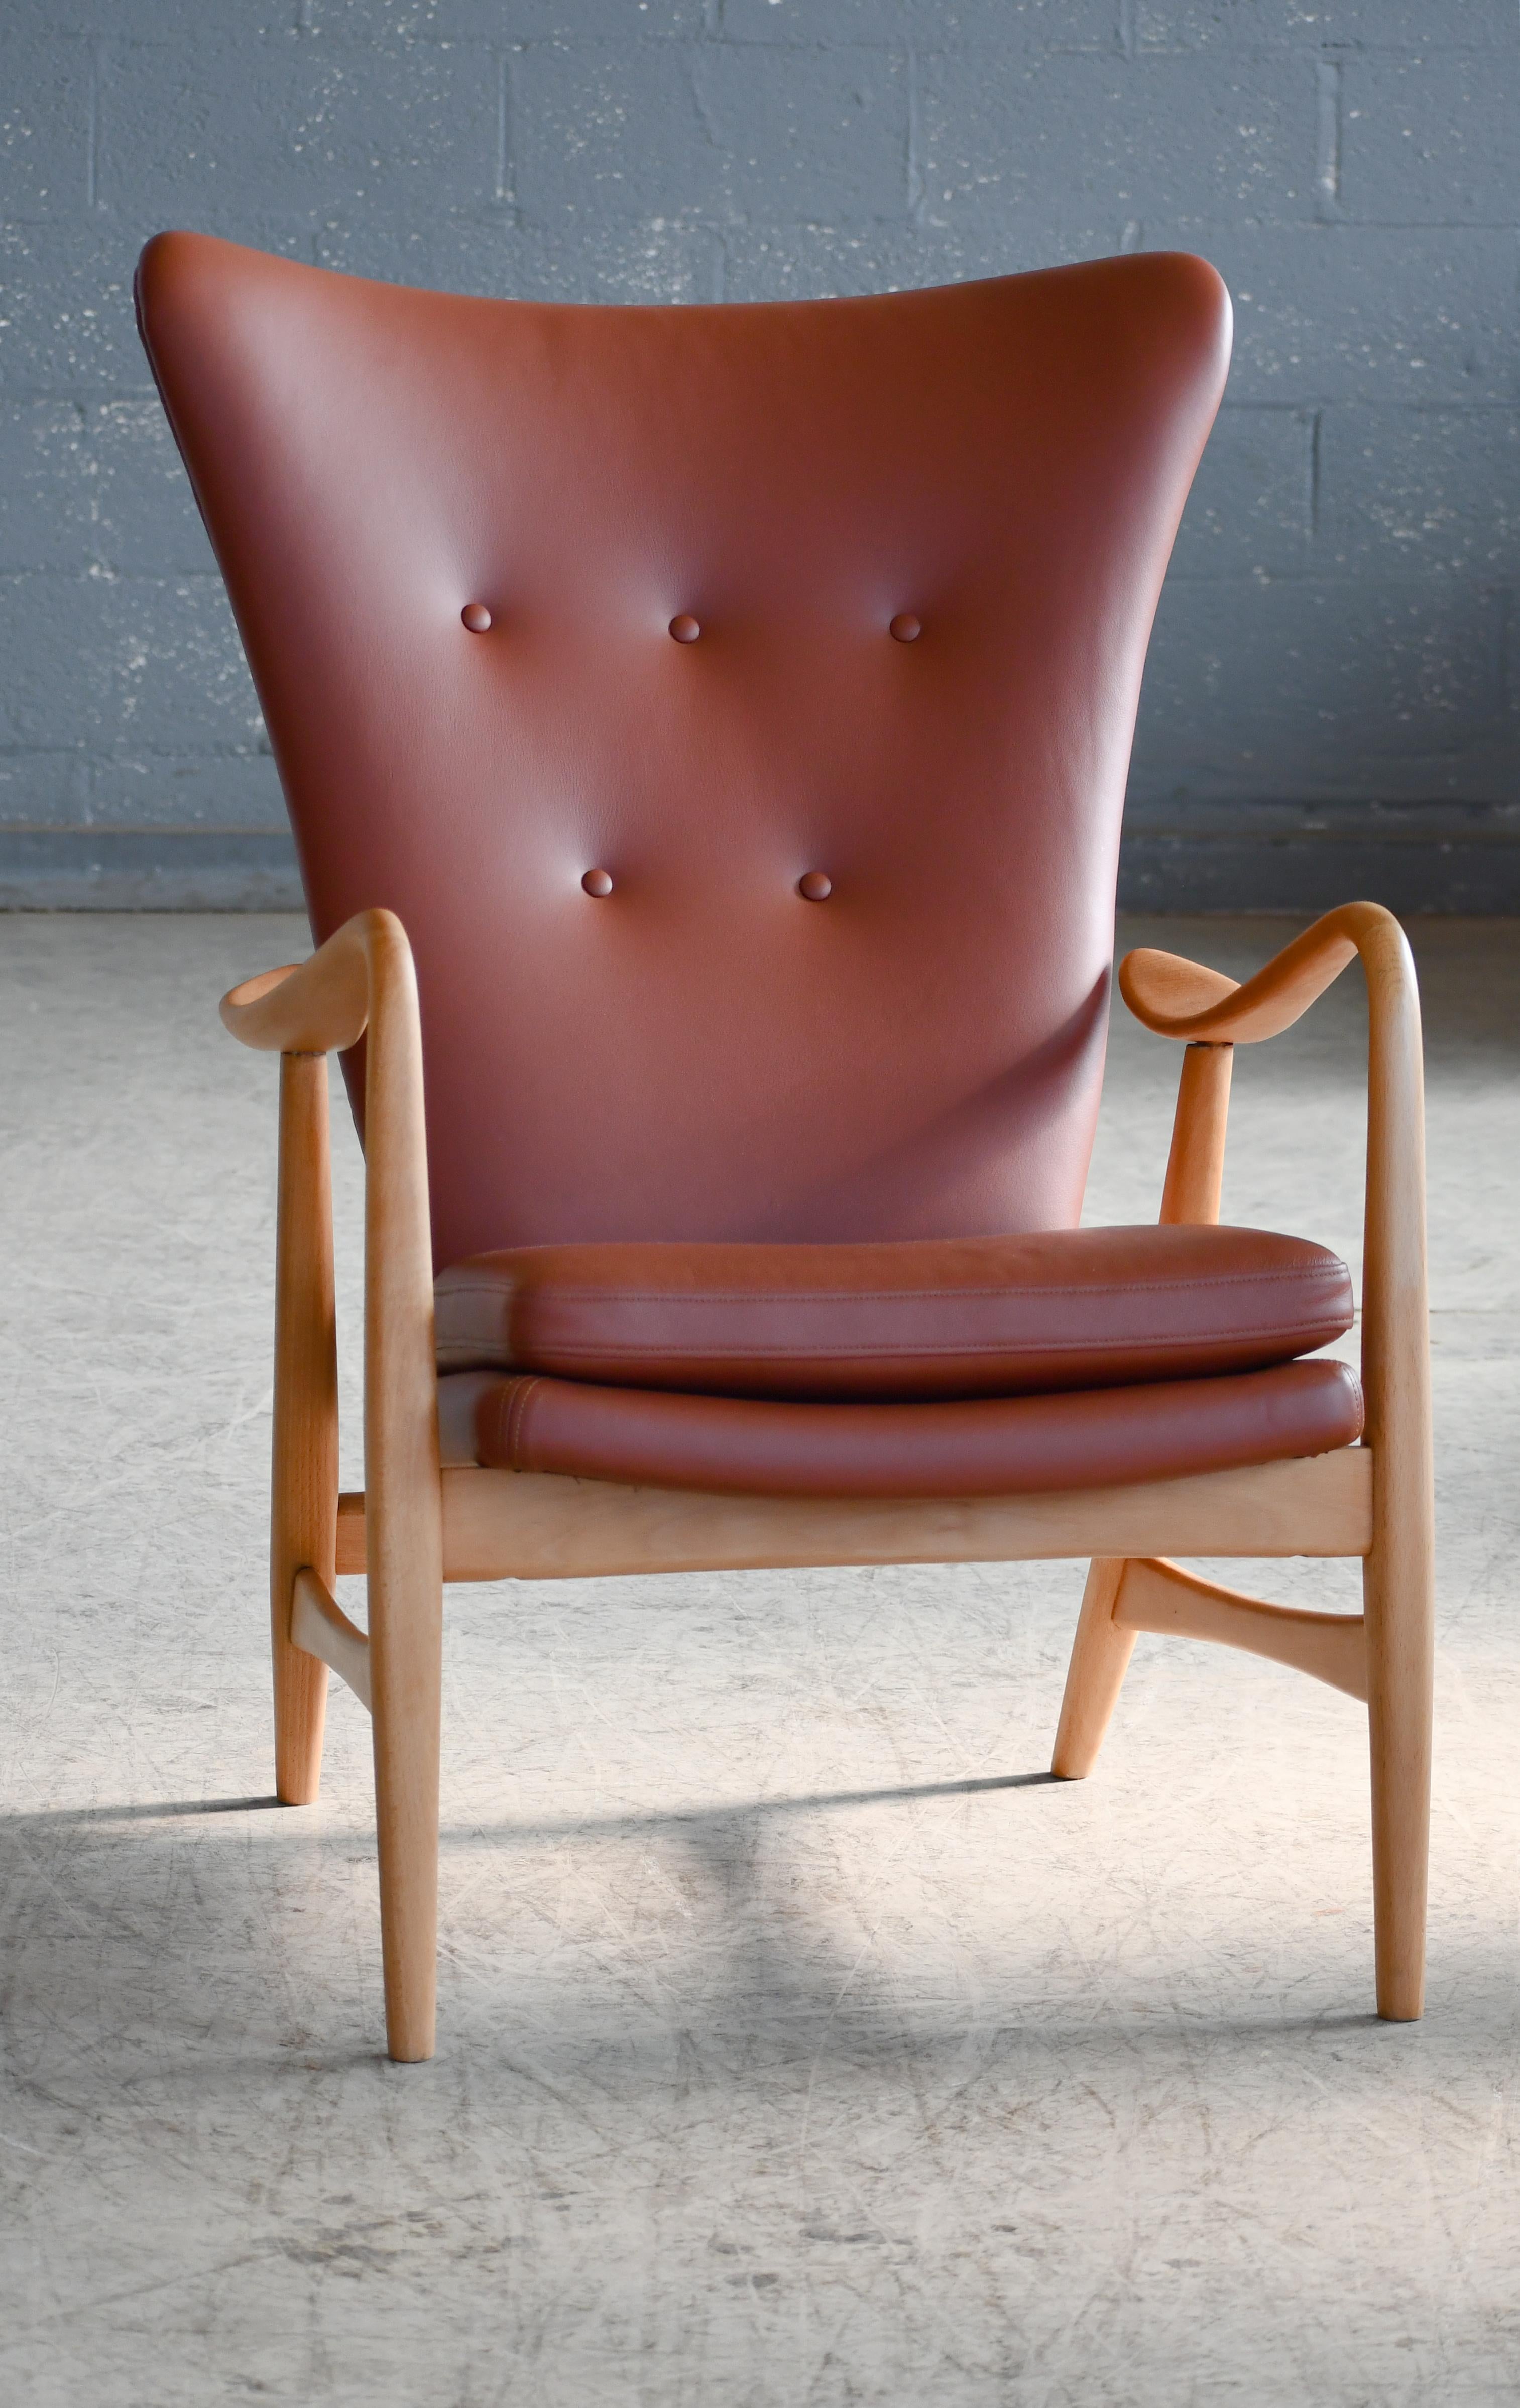 Mid-Century Modern Danish Easy chair with Beech Frame Reupholstered in a Light Brown Leather, 1950s For Sale